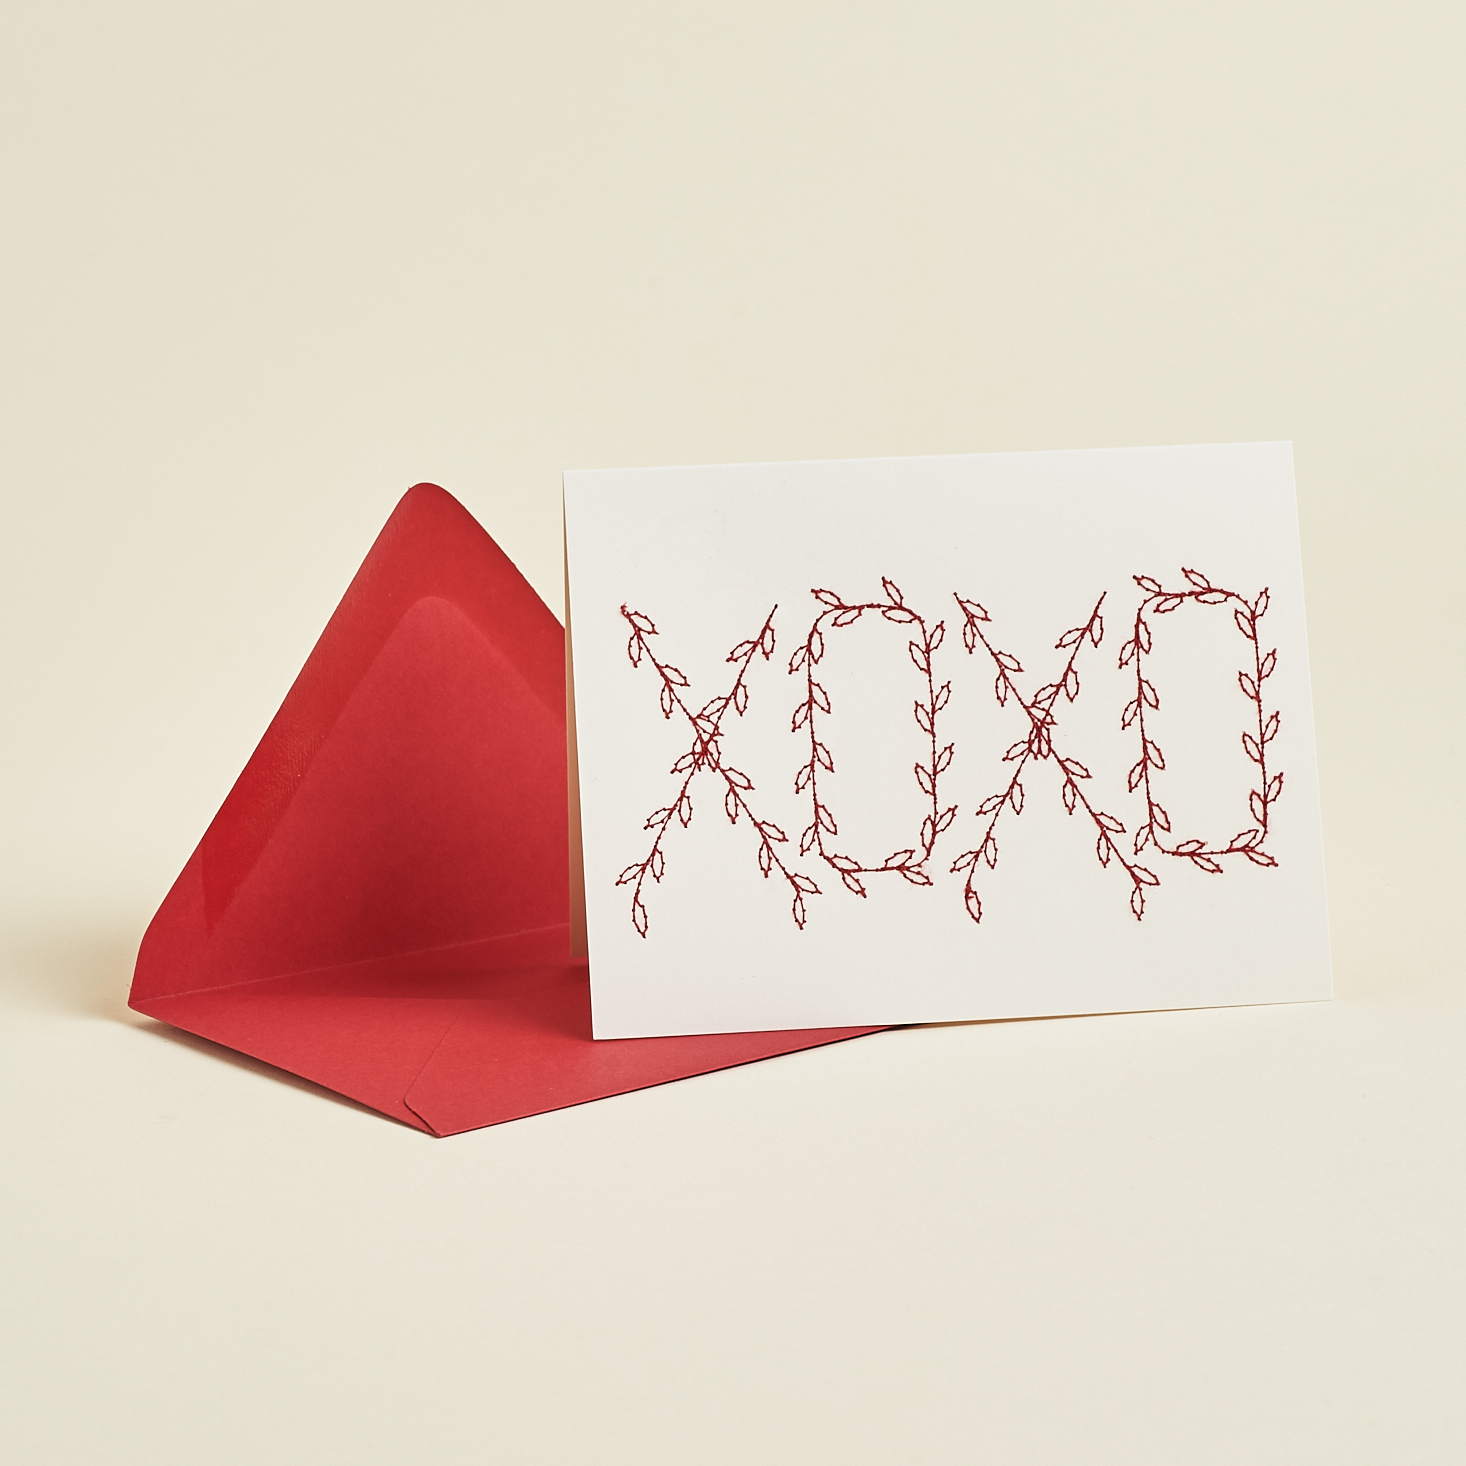 Embroidered XOXO card from Postmarkd Studio February 2021